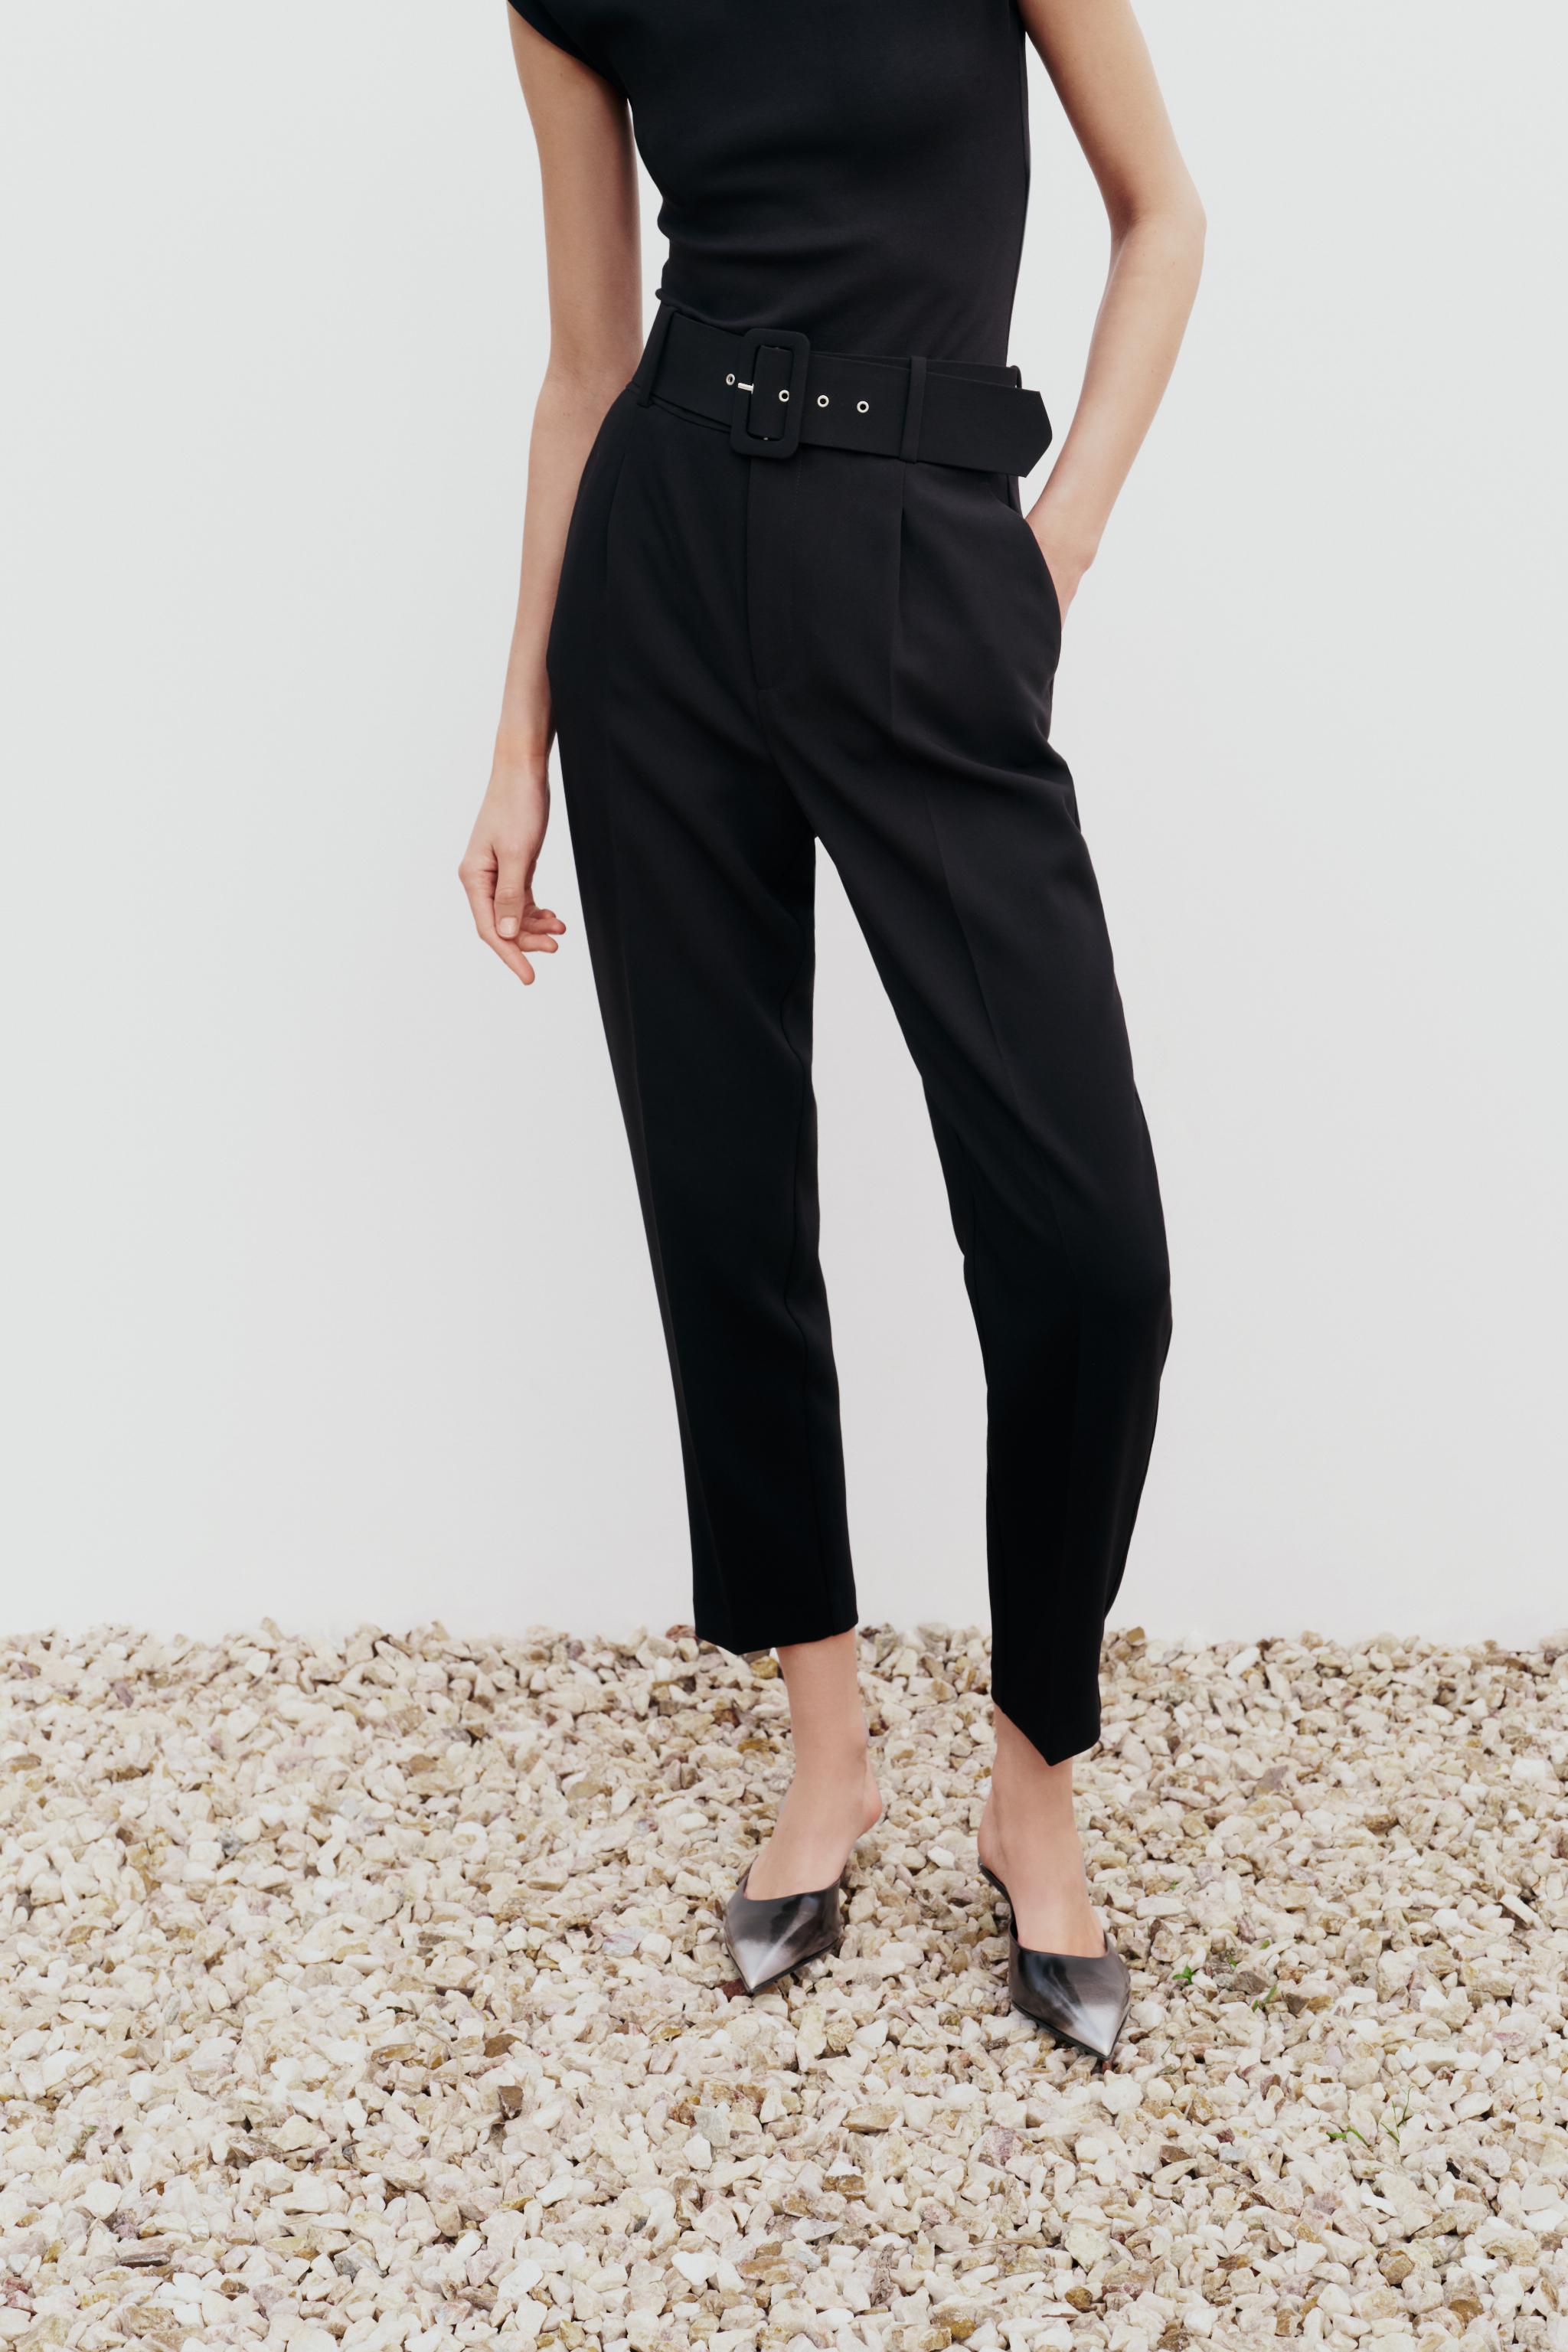 ZARA high waisted belted pants, size s , New. Black - $49 (44% Off Retail)  New With Tags - From Doris